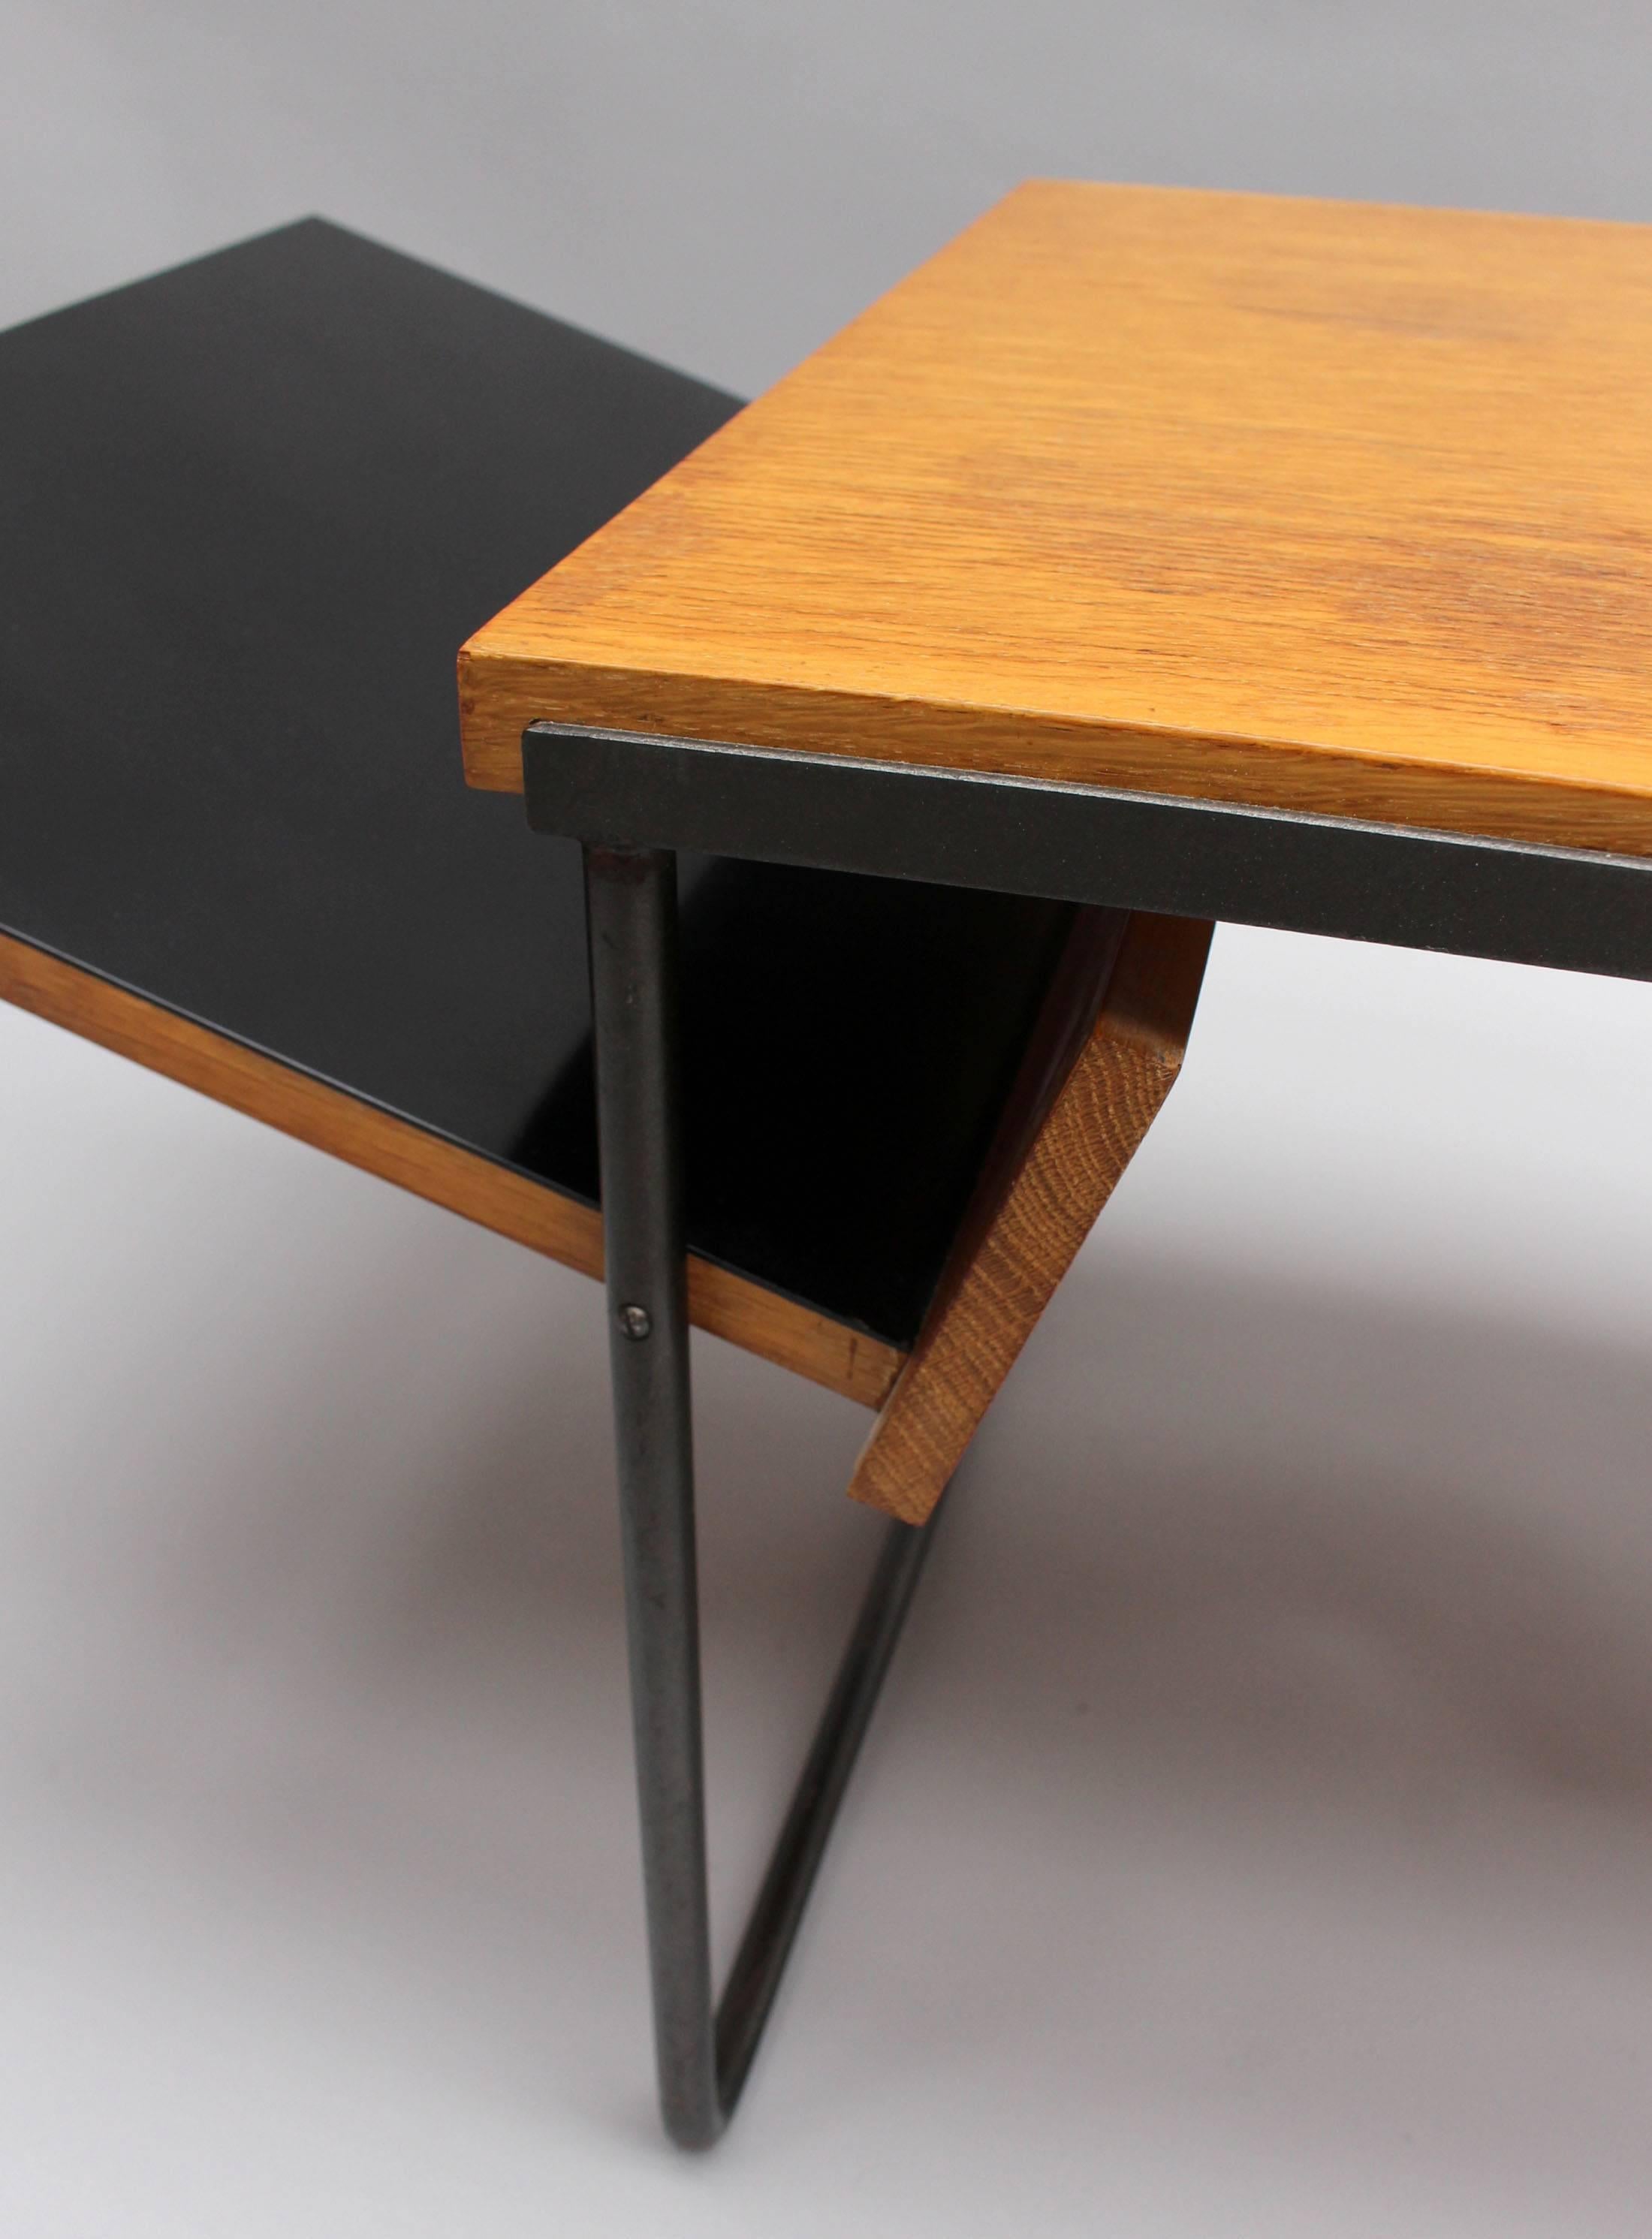 A Fine French Mid-Century Oak and Laminate Coffee Table with a Metal Base 4